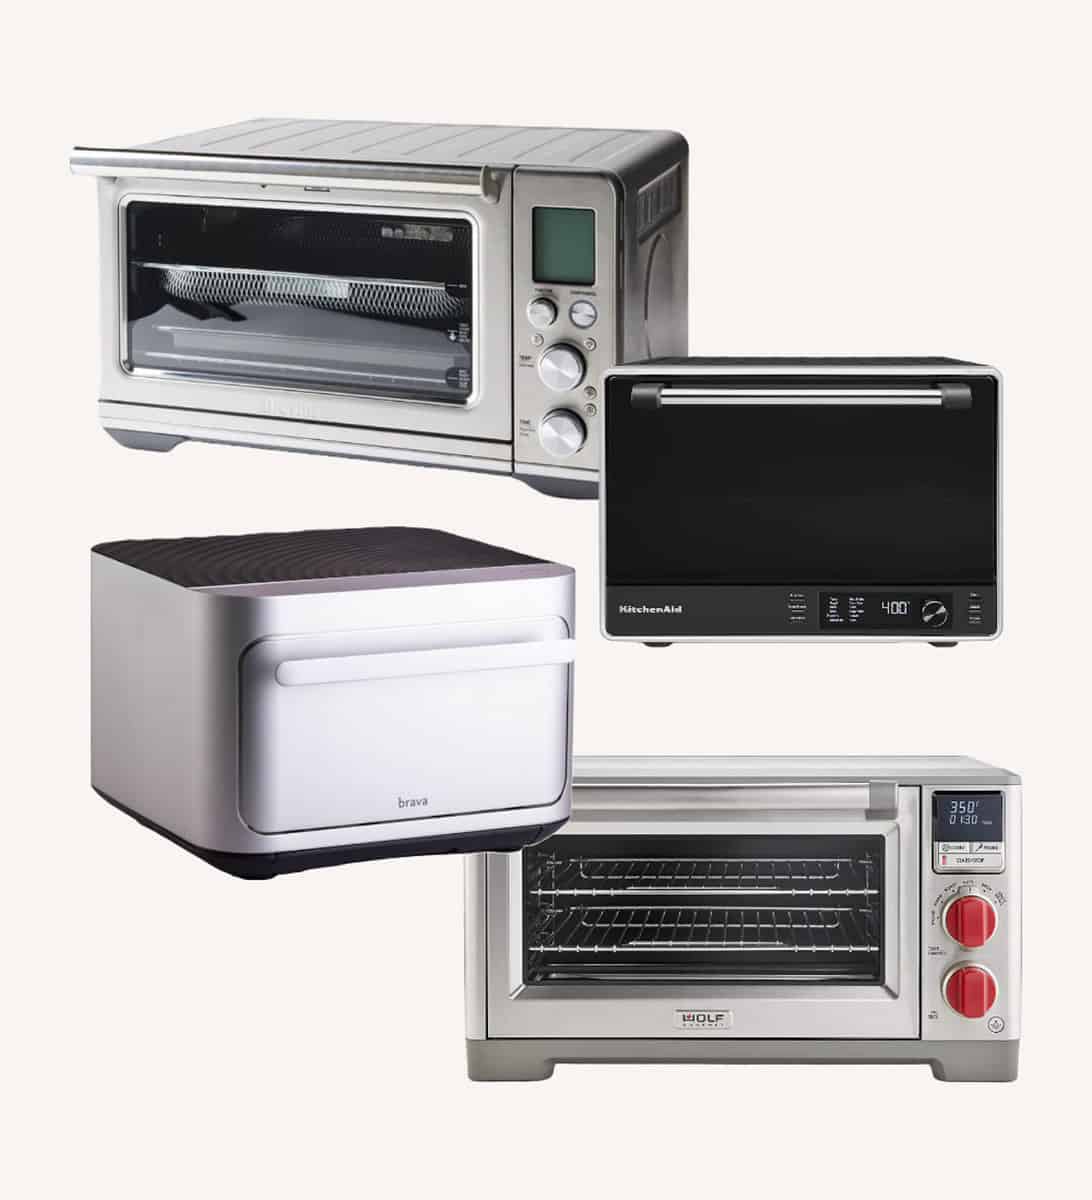 convection ovens on a white background